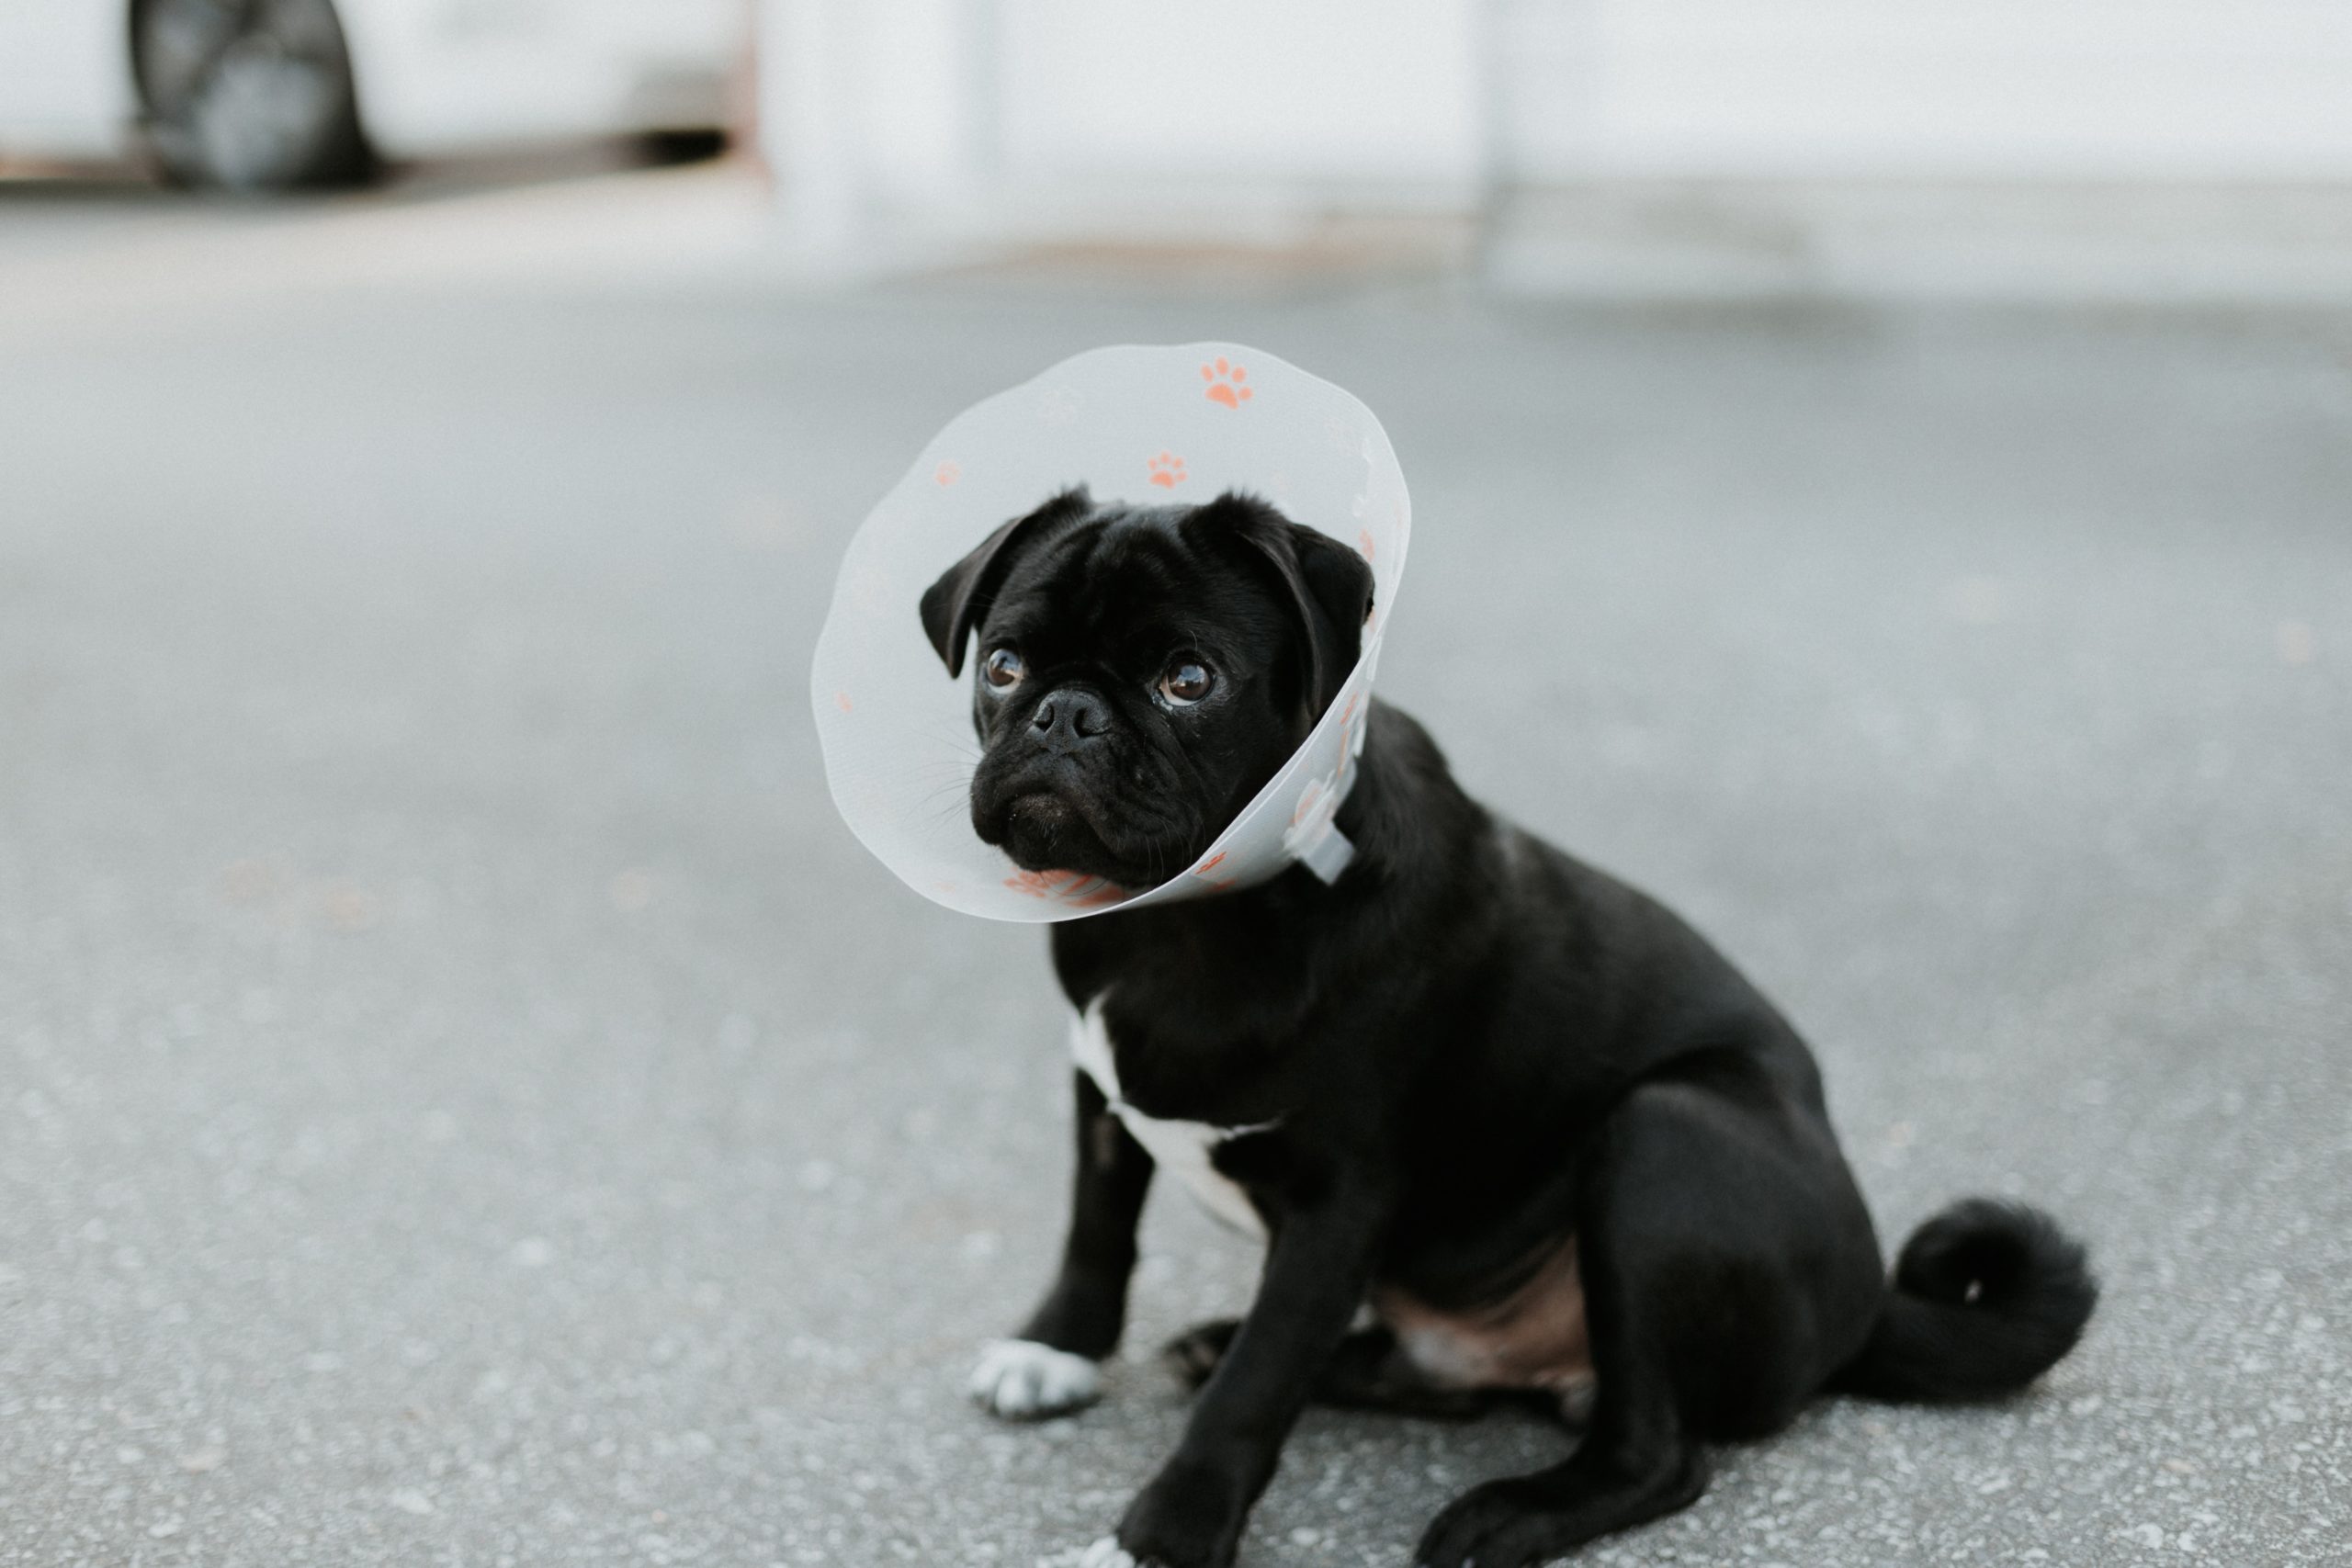 How to put a cone on a dog?